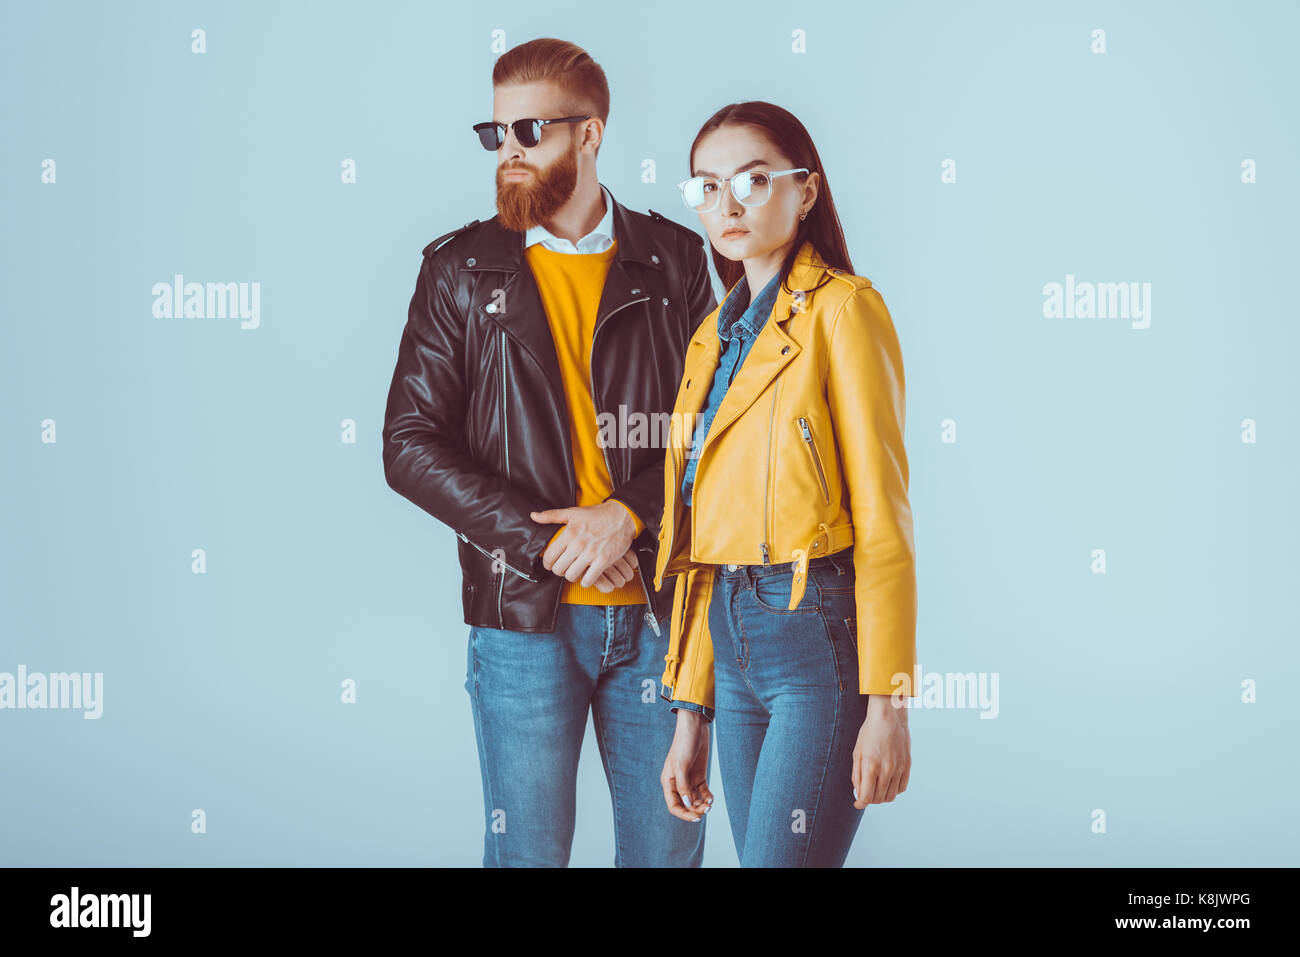 fashionable couple in leather jackets Stock Photo